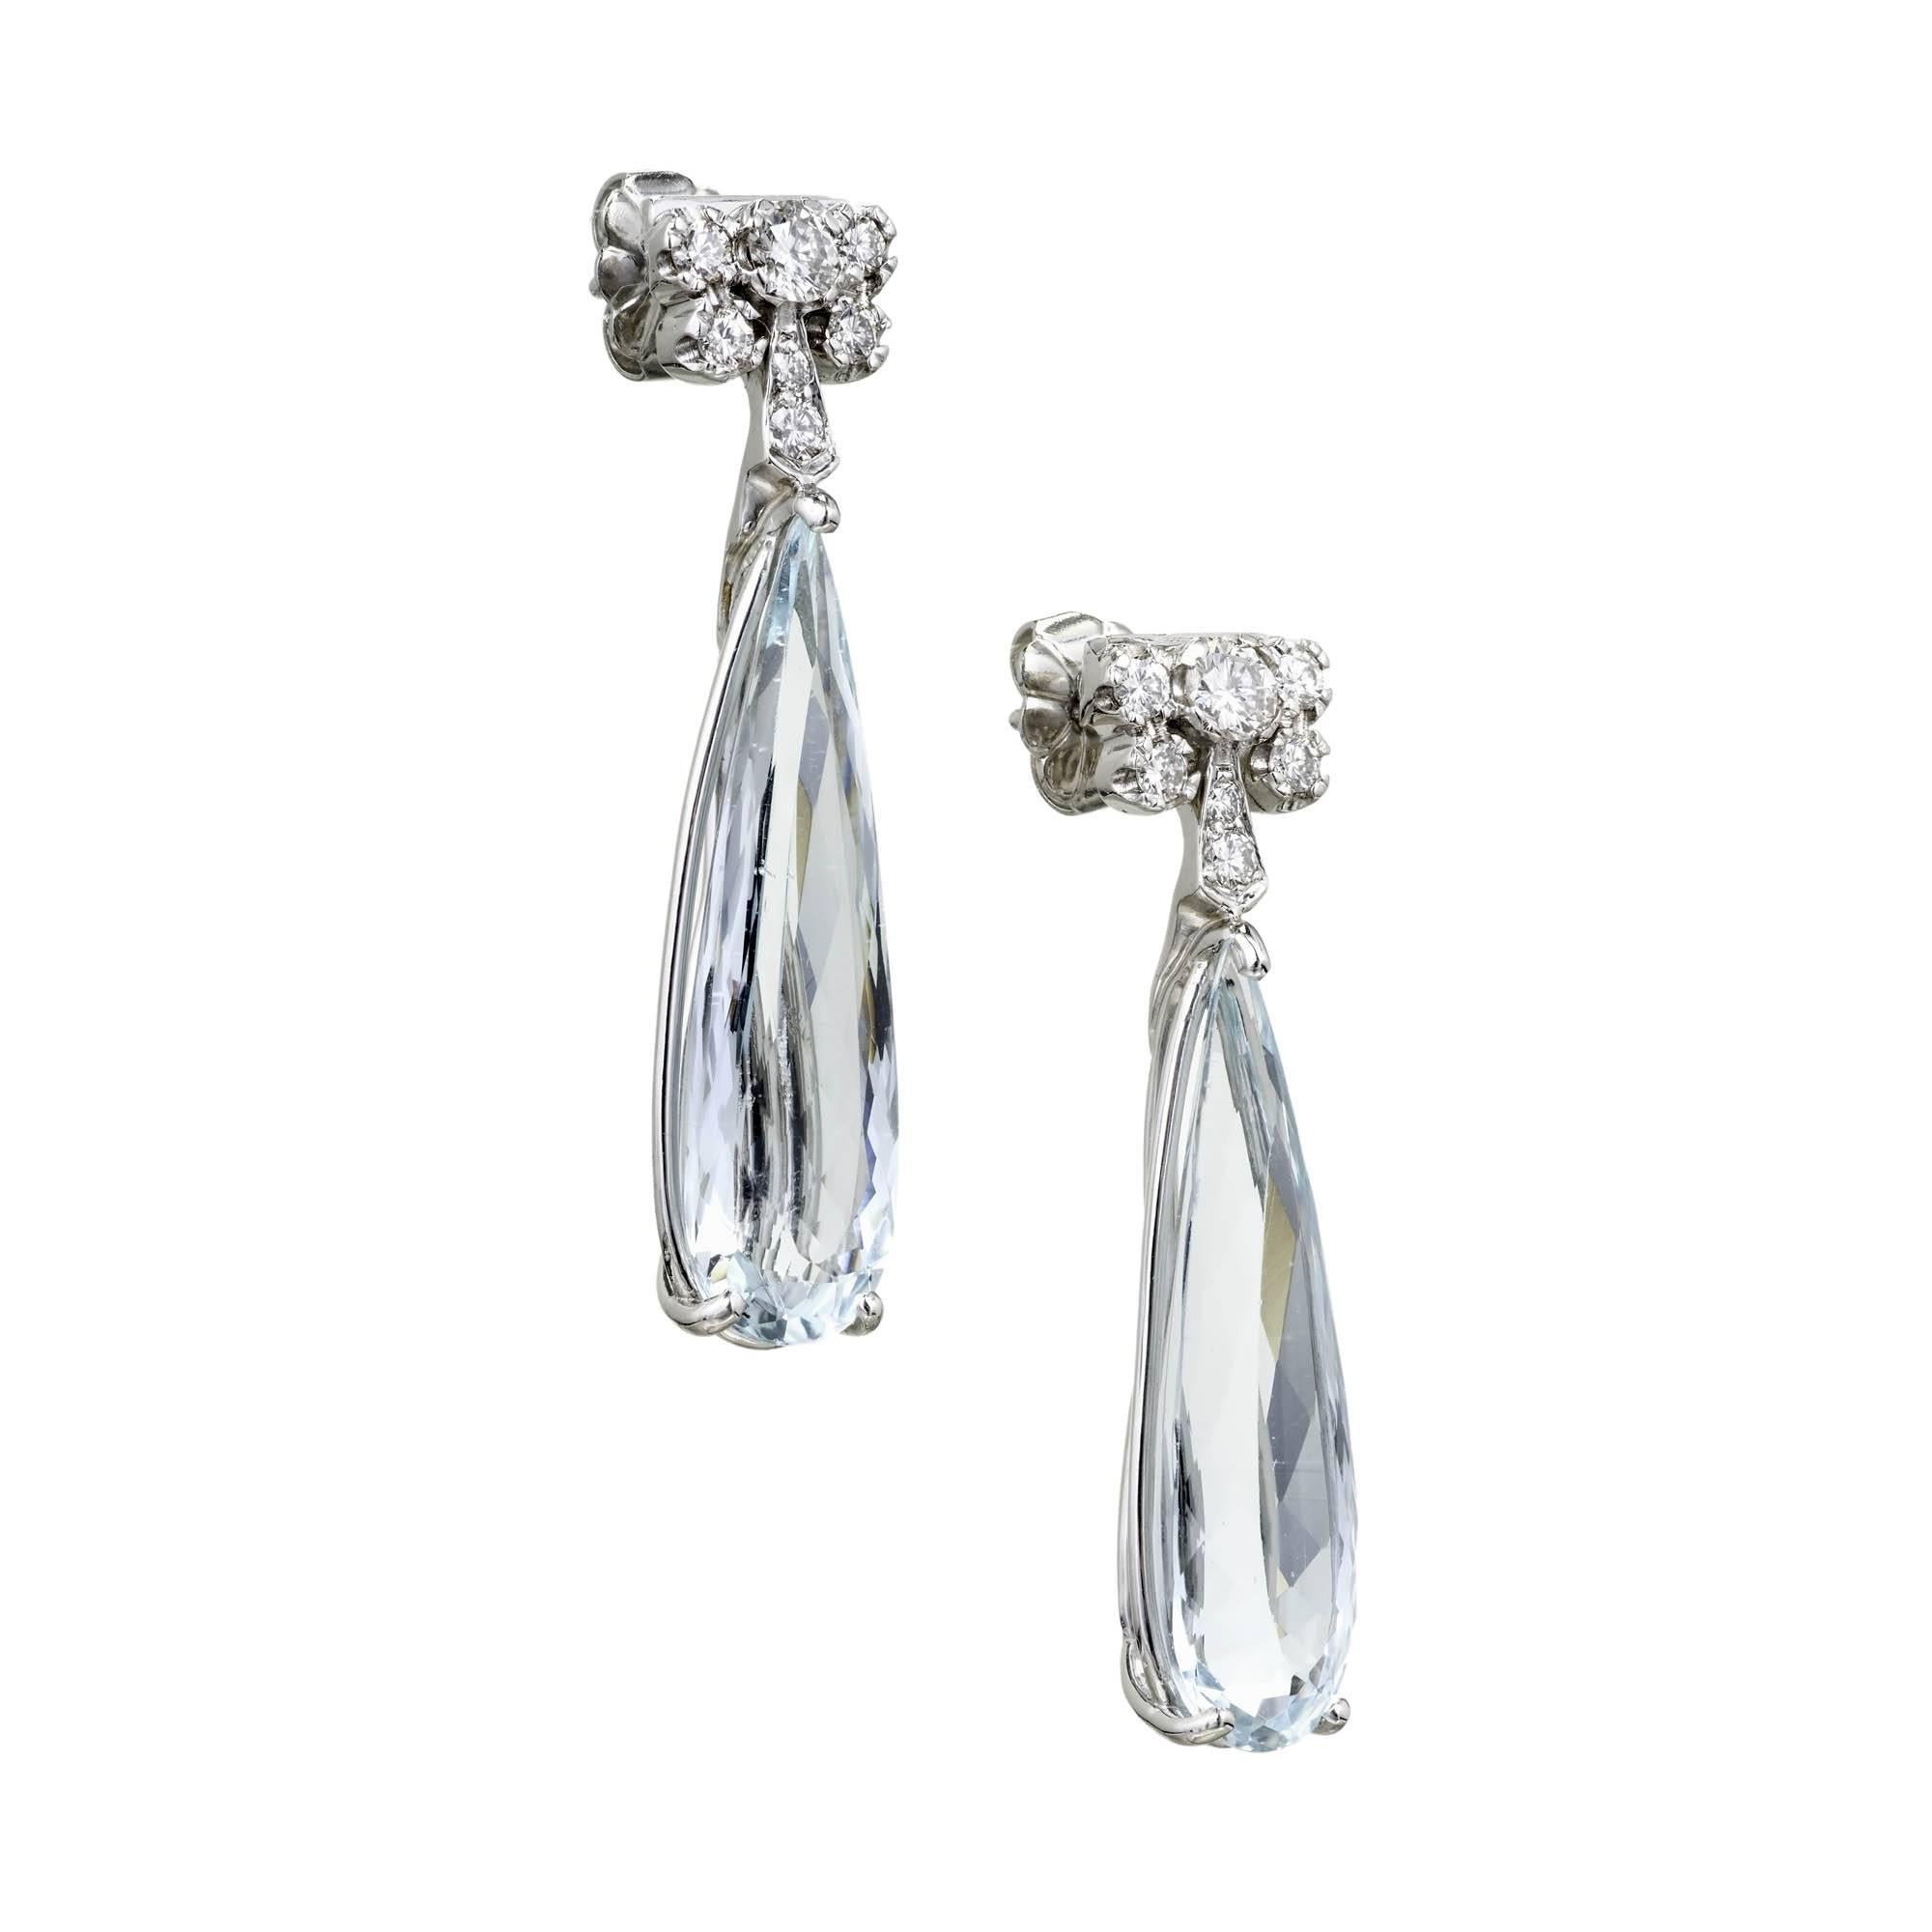 1940’s natural Aqua Platinum earrings. Handmade settings with elongated pear soft bright blue Aqua and bright white full cut Diamond accents.

2 elongated pear shaped light blue Aquamarines, approx. total weight 9.39cts, VS – SI, 24.0 x 7.4mm
14